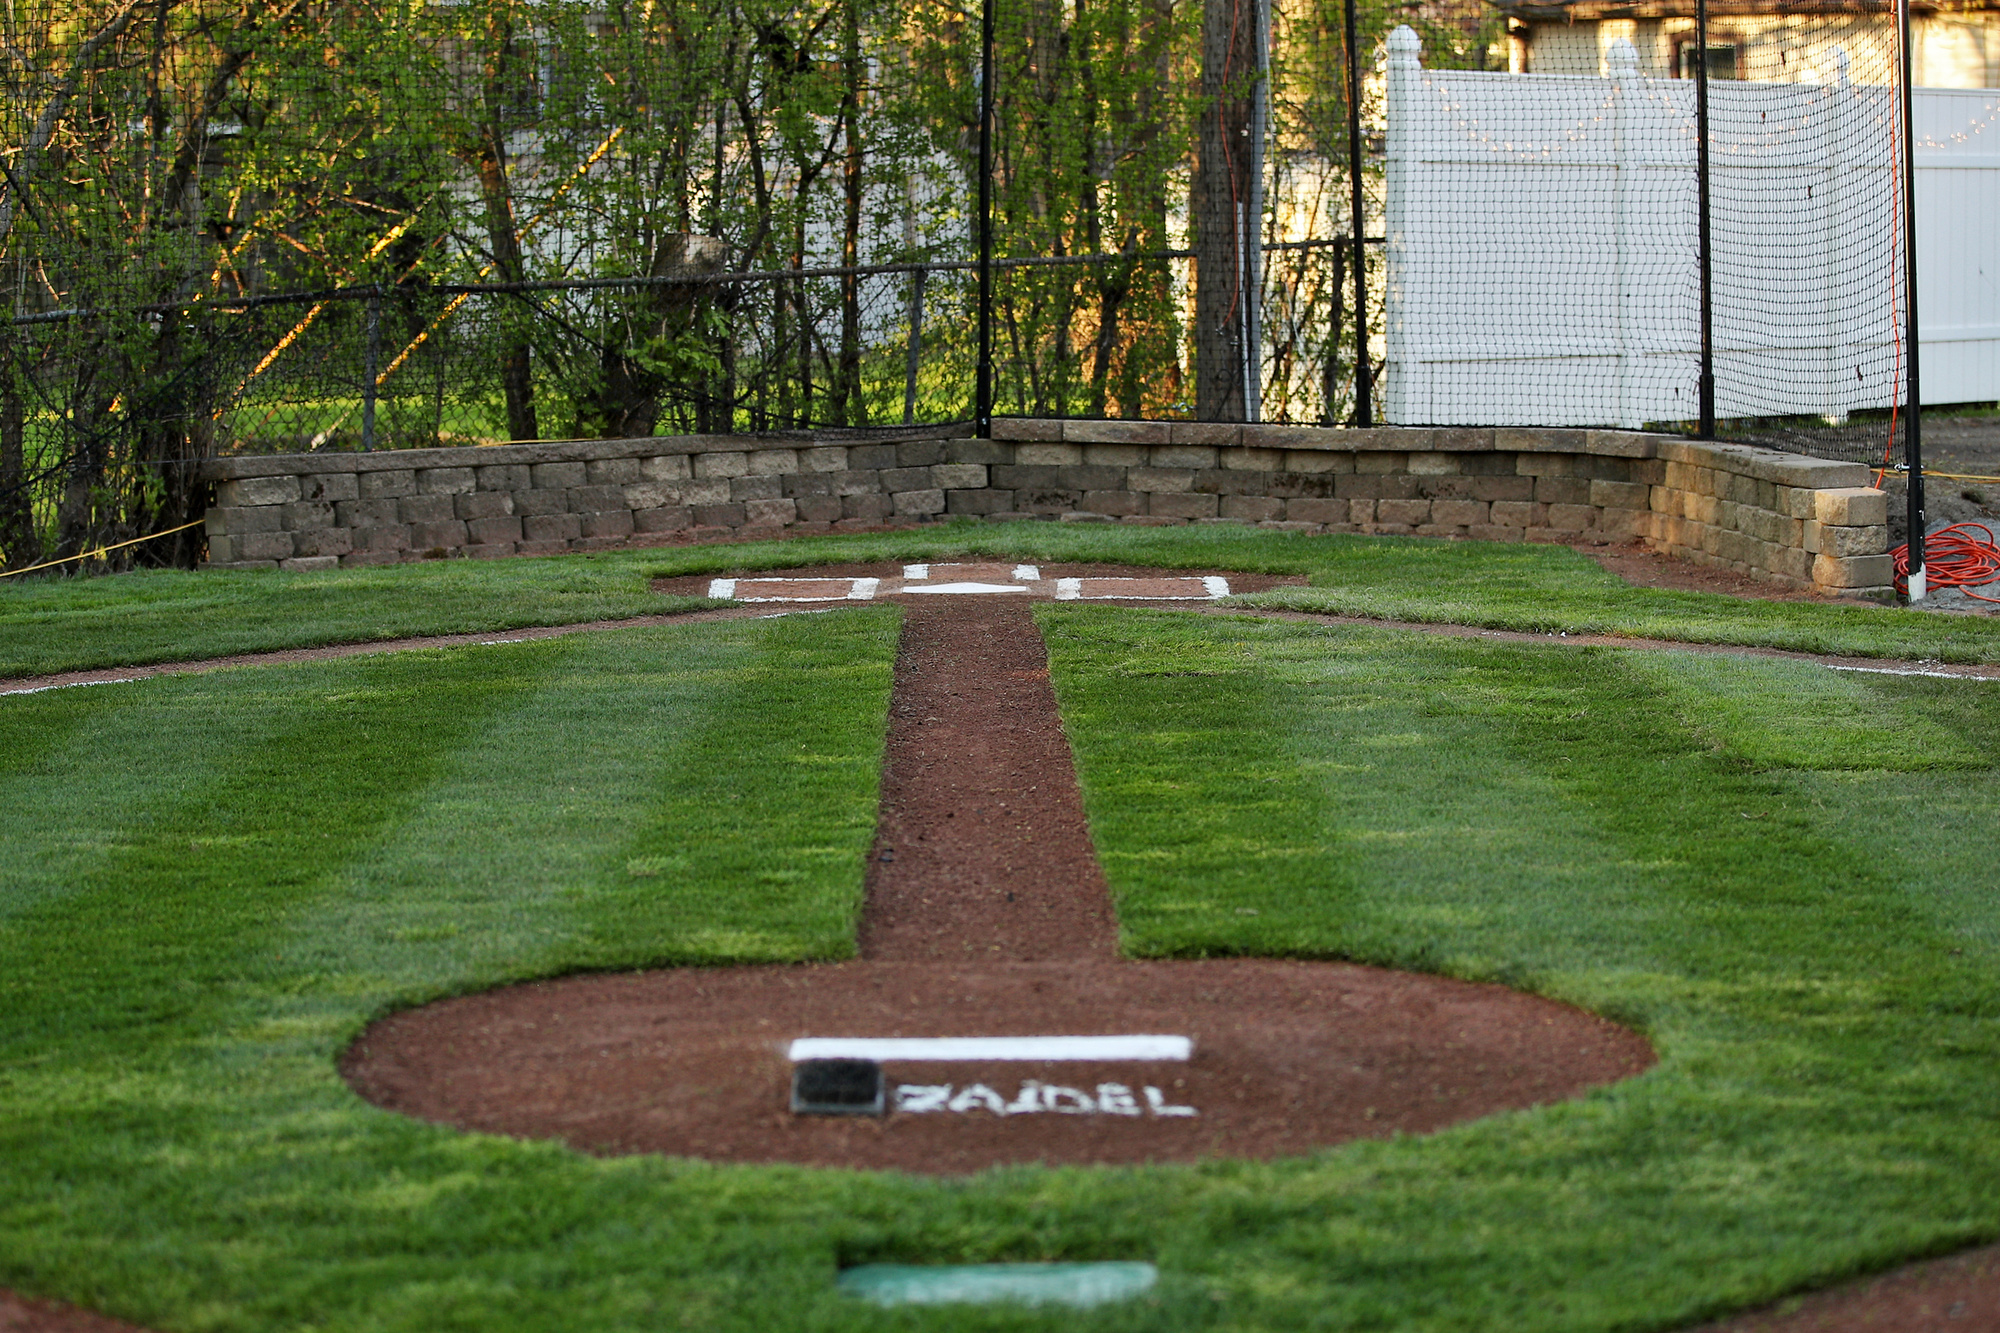 A Slice Of Heaven Michigan Man Builds Wiffle Ball Dream Field In